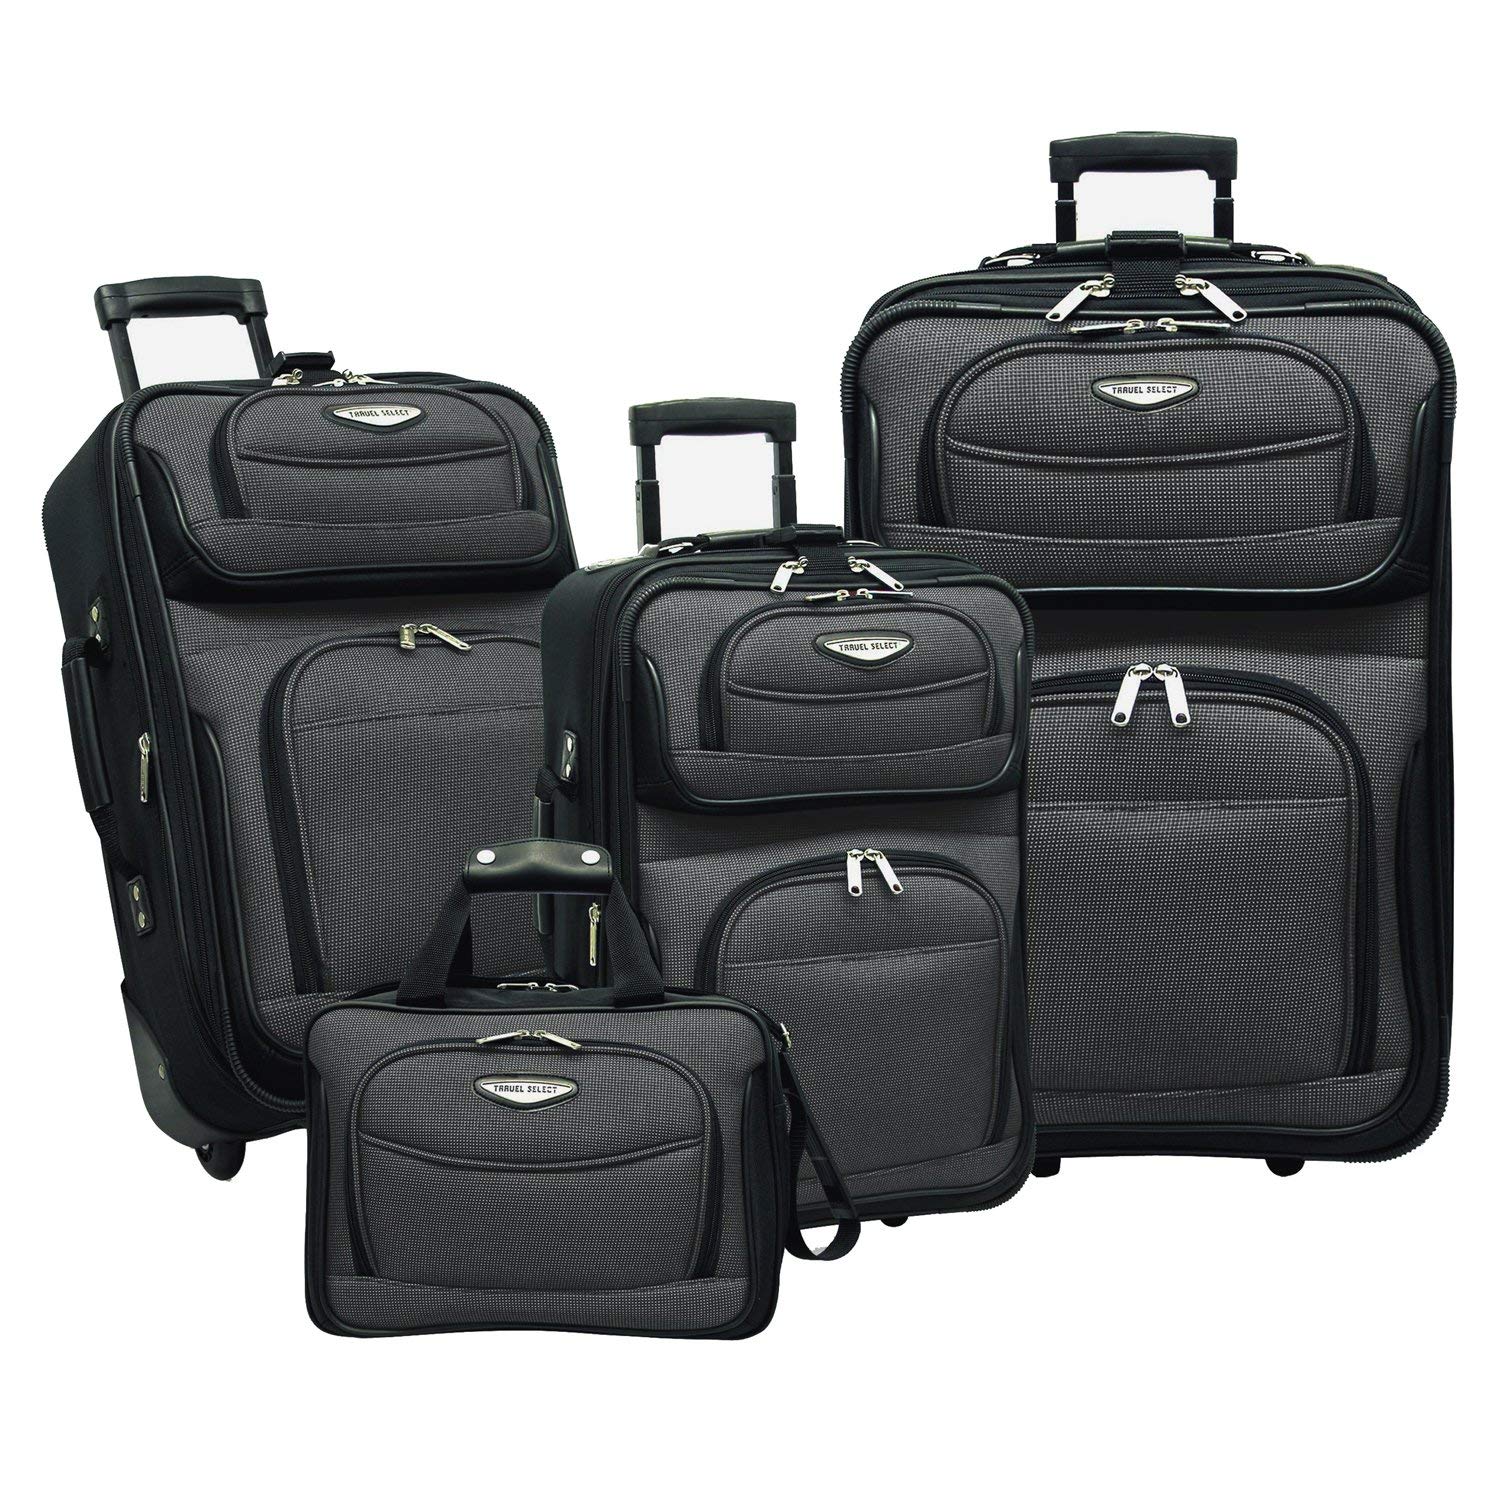 top rated travel luggage sets